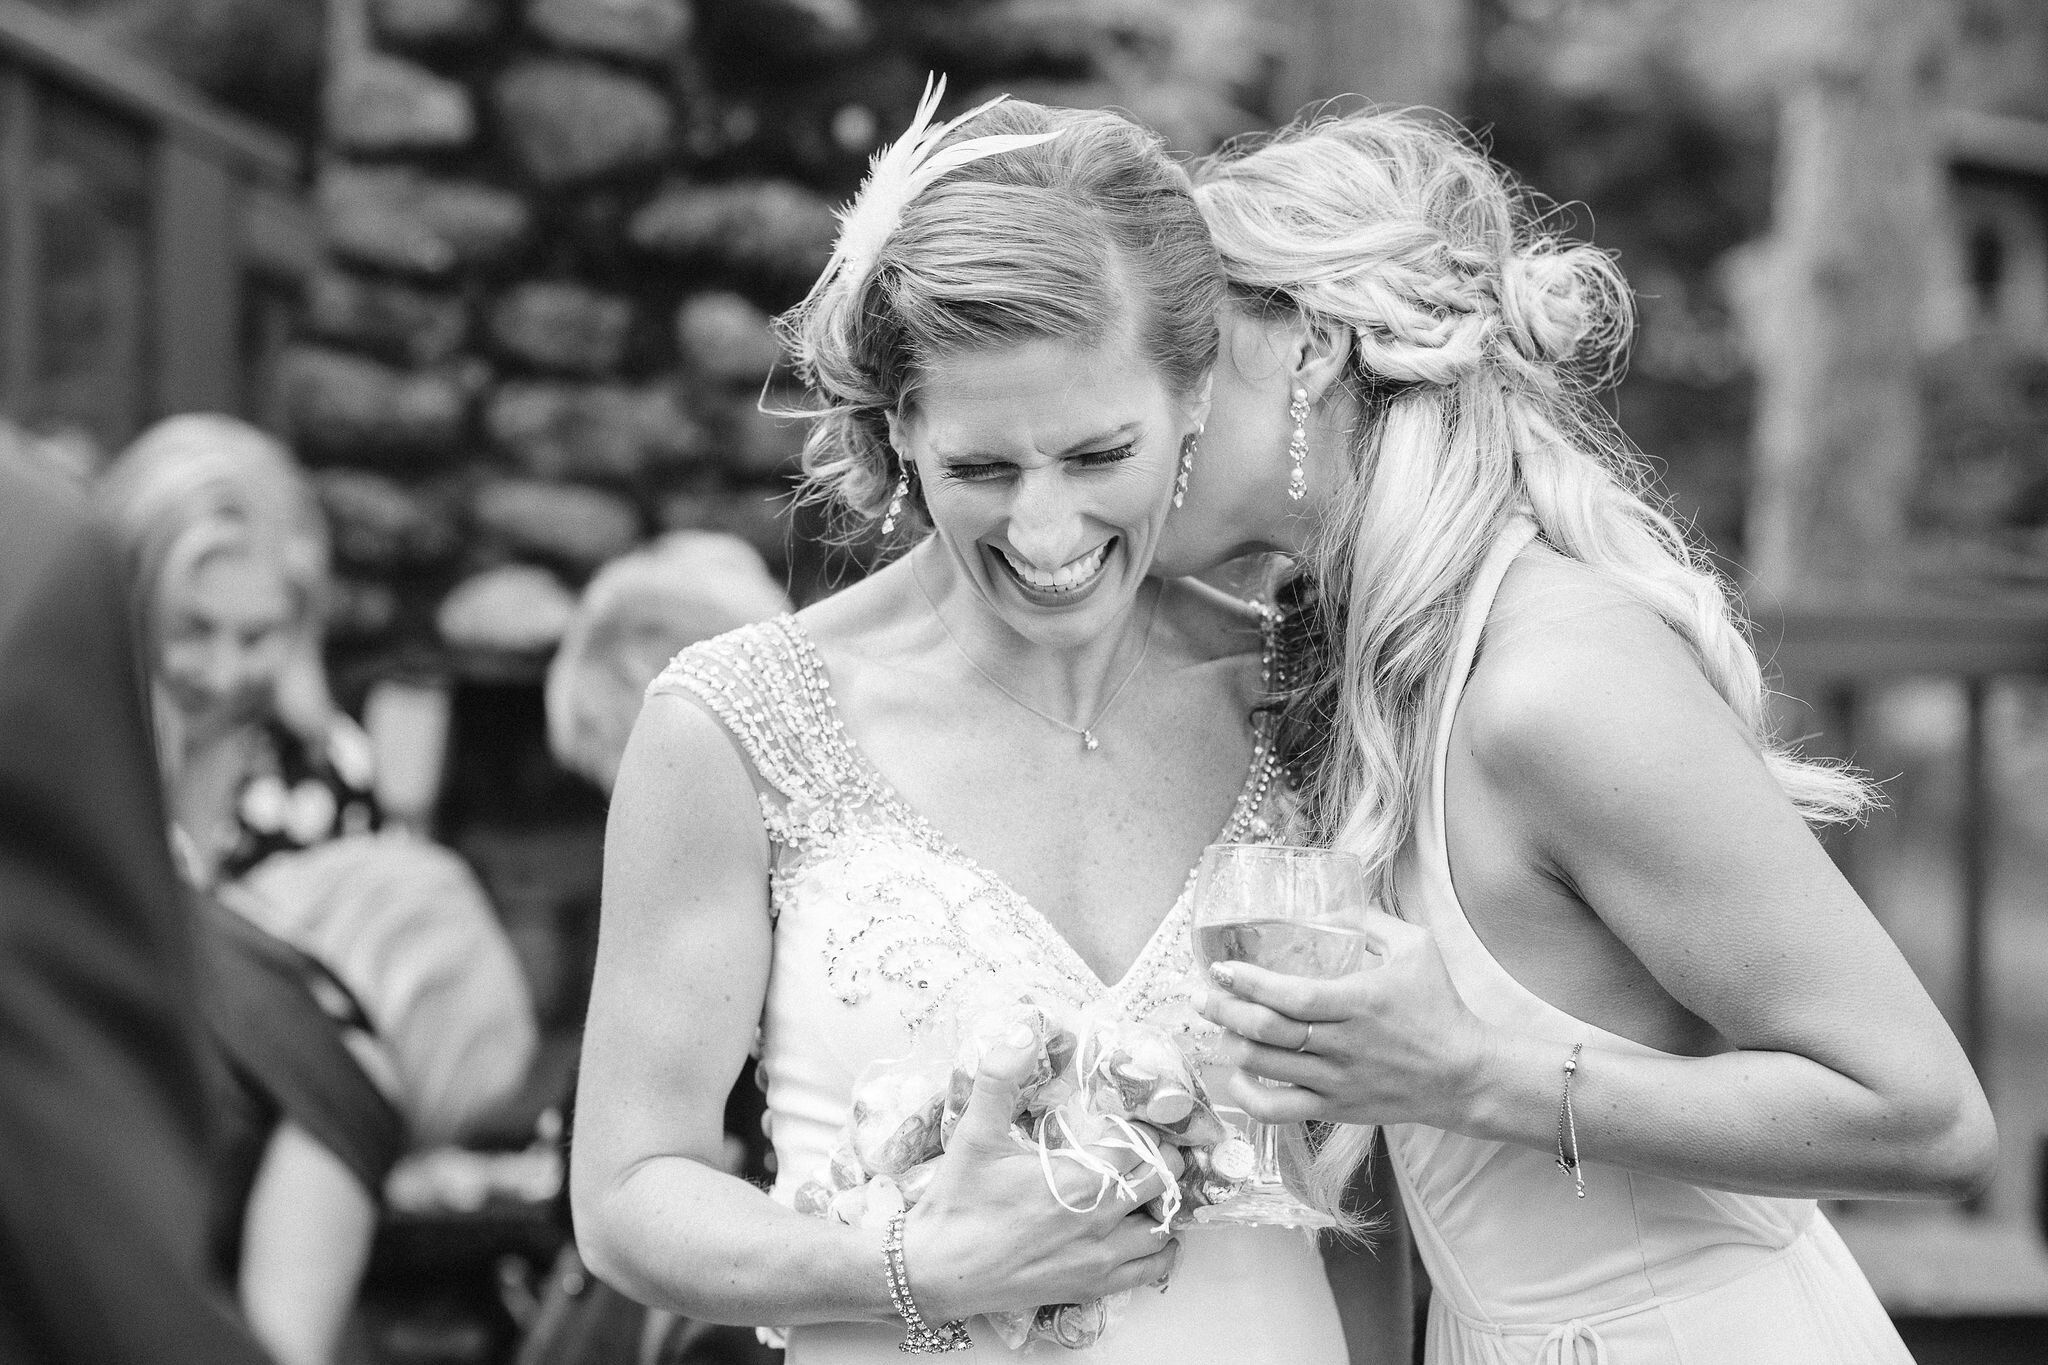 Maid of honor whispering in bride's ear